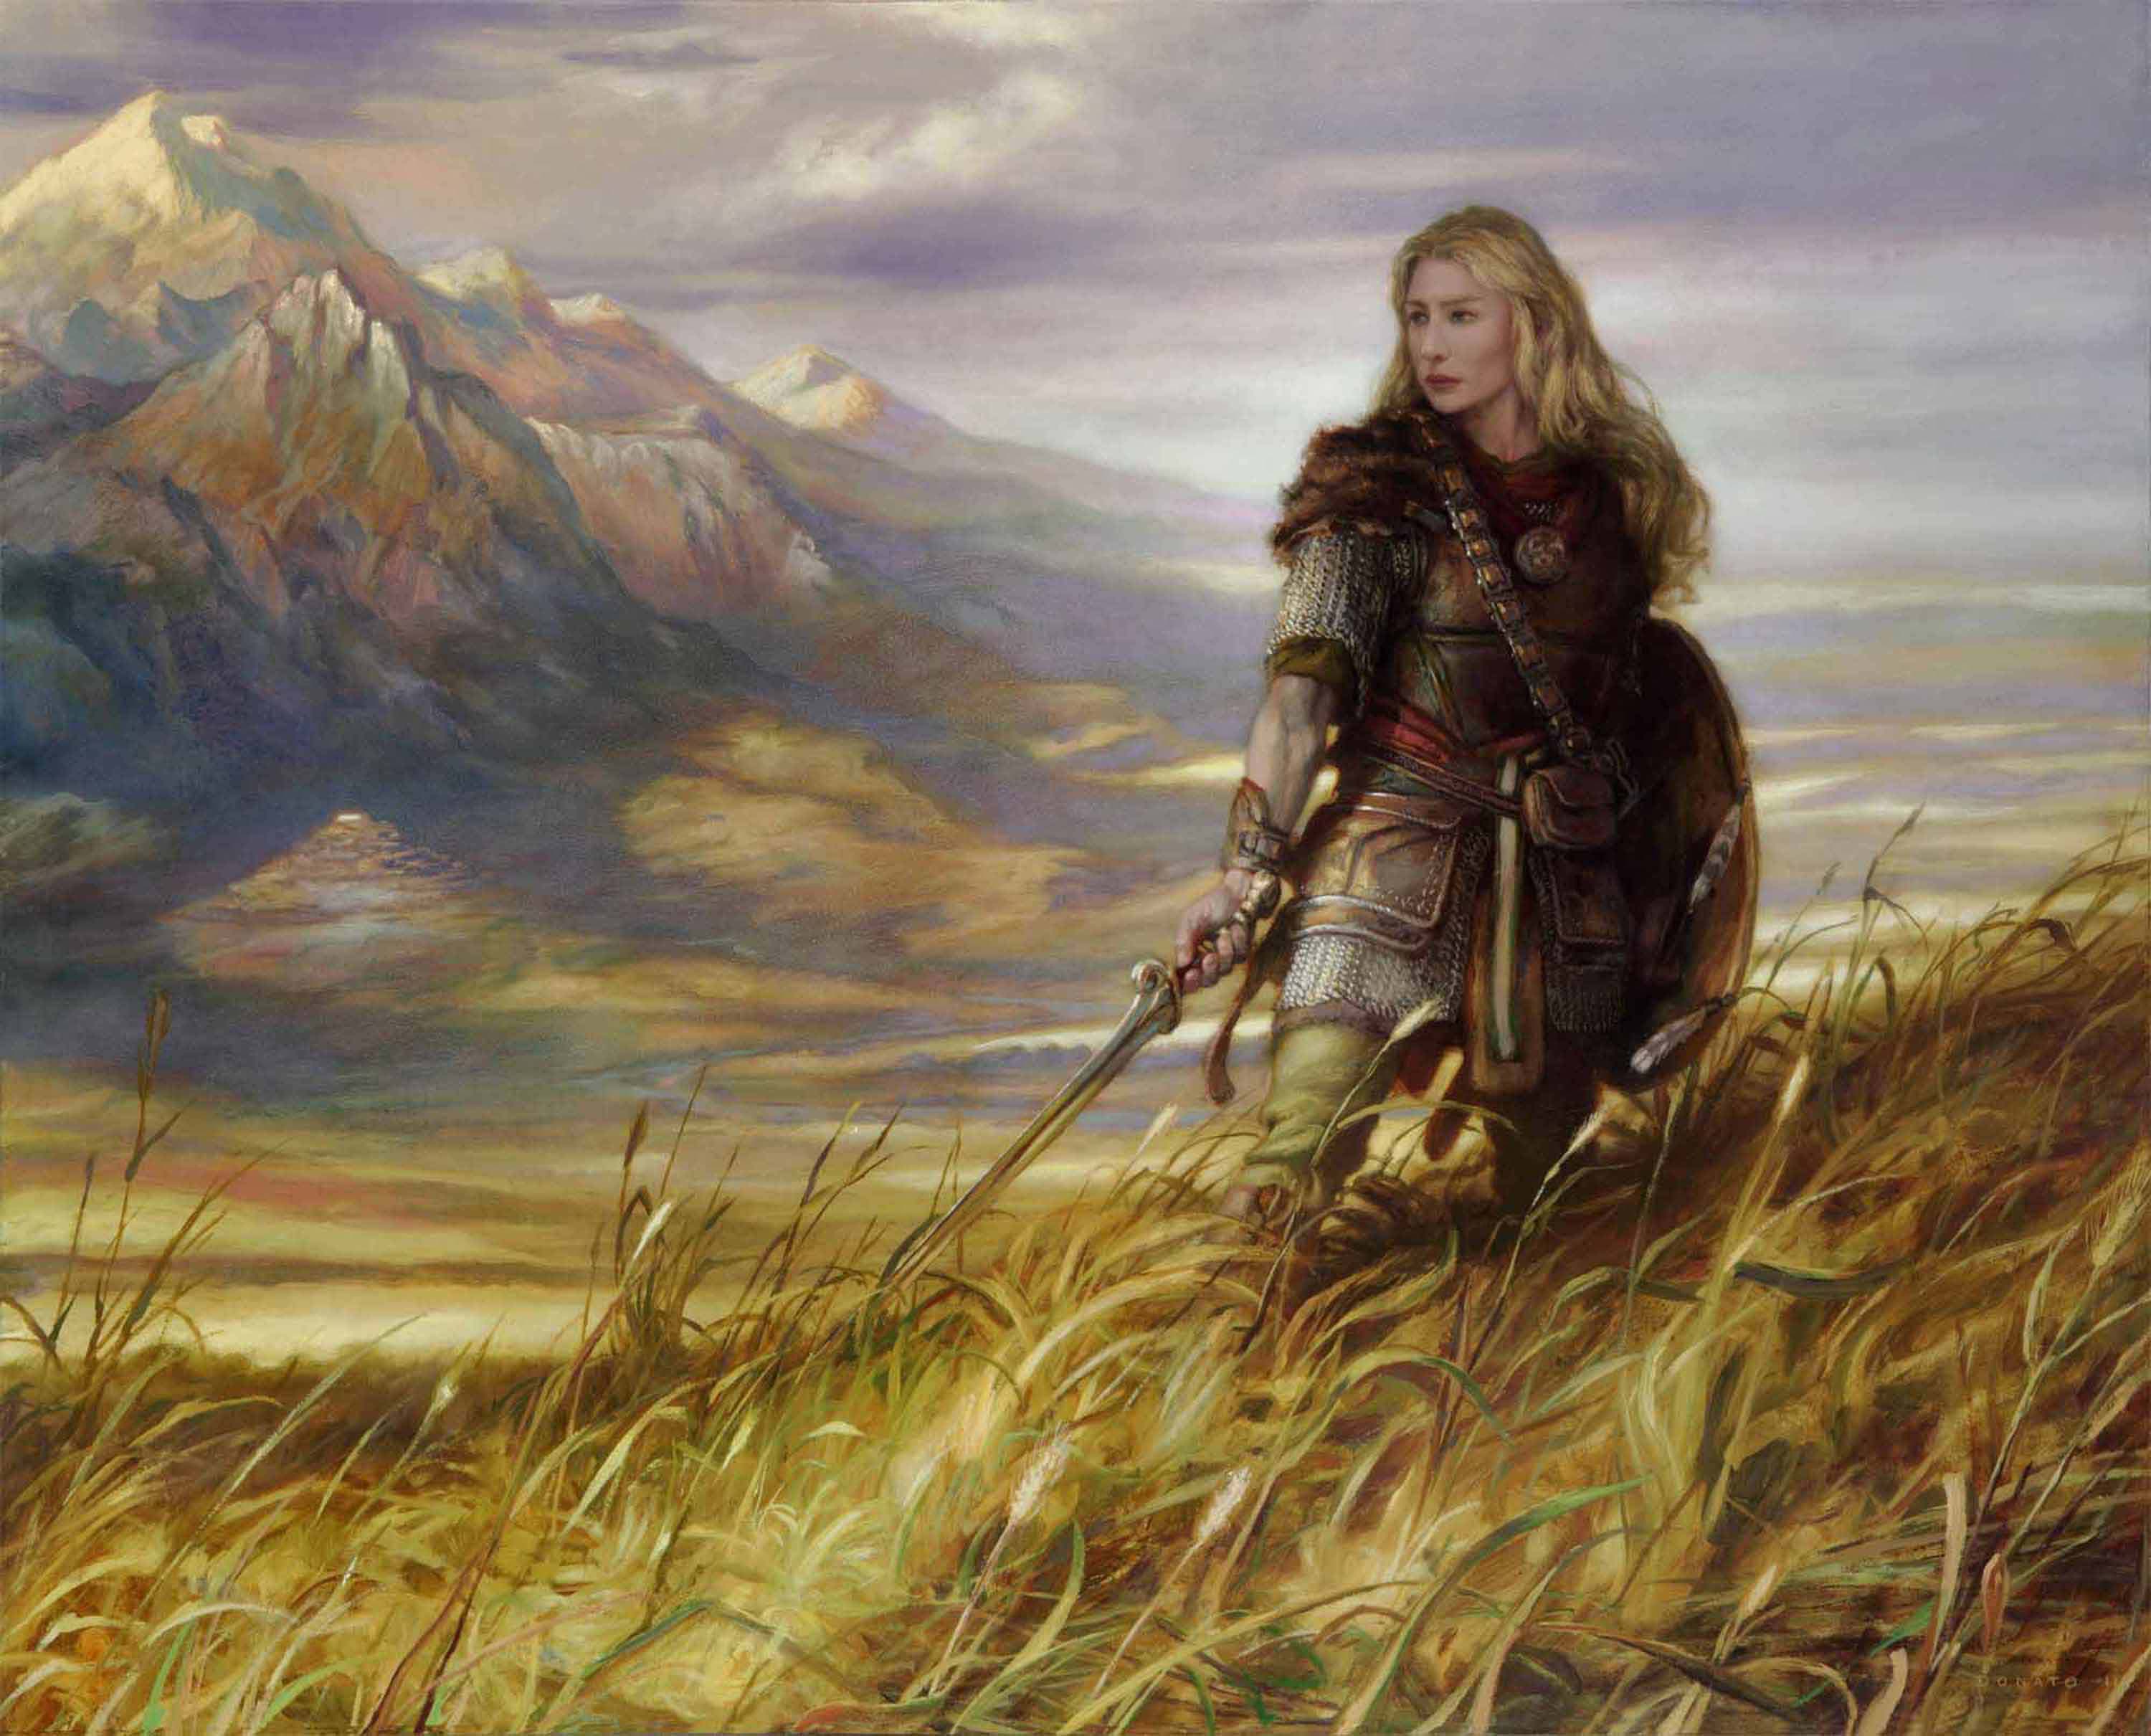 Eowyn - Defender of Rohan
24" x 30"  Oil on Panel  2011
private collection